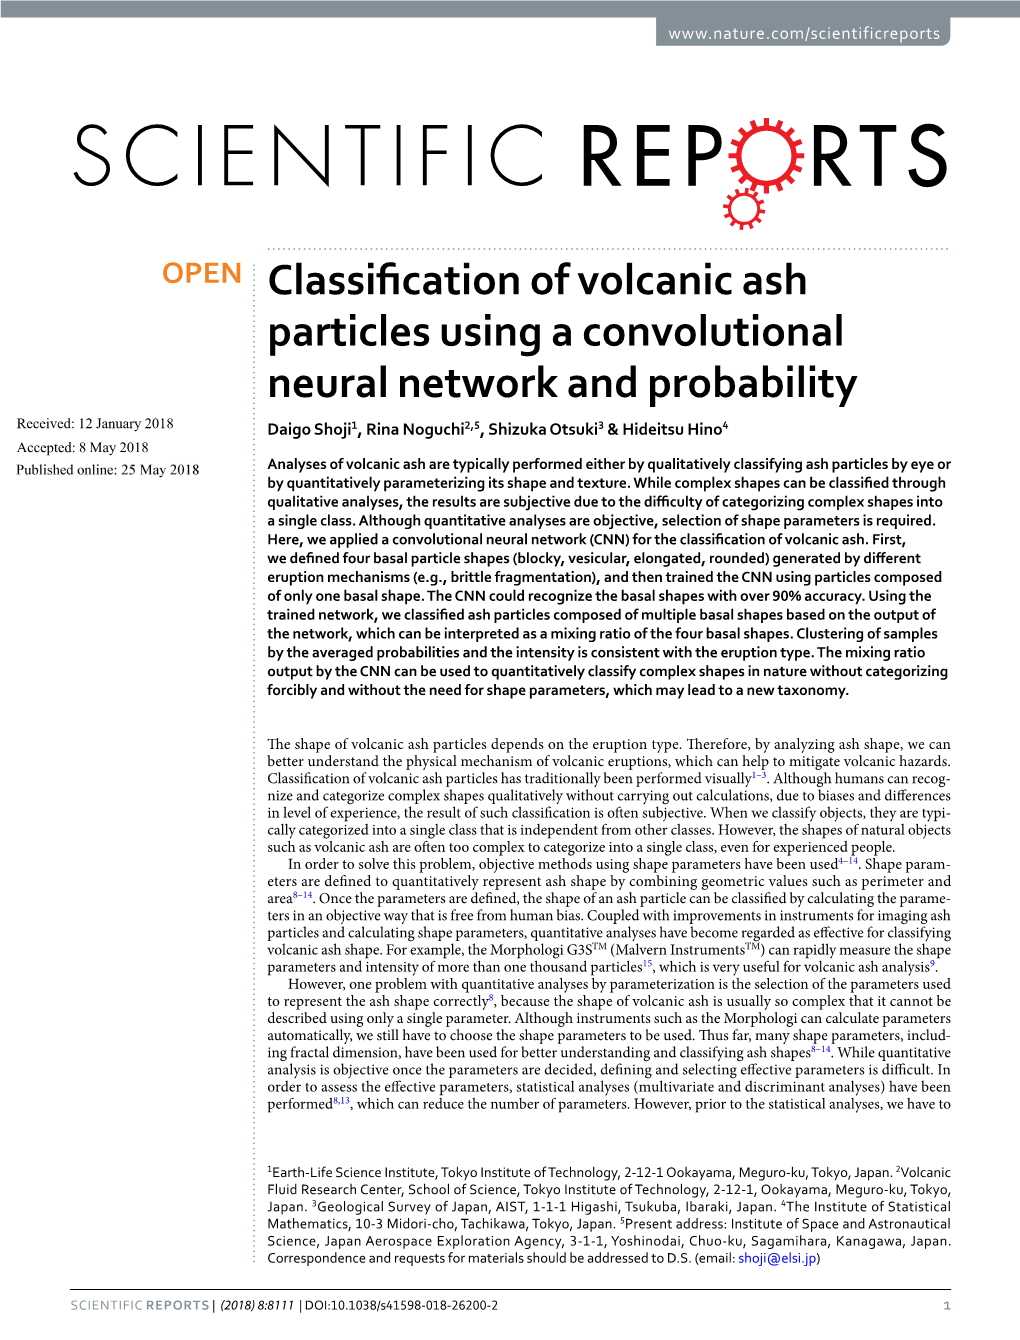 Classification of Volcanic Ash Particles Using a Convolutional Neural